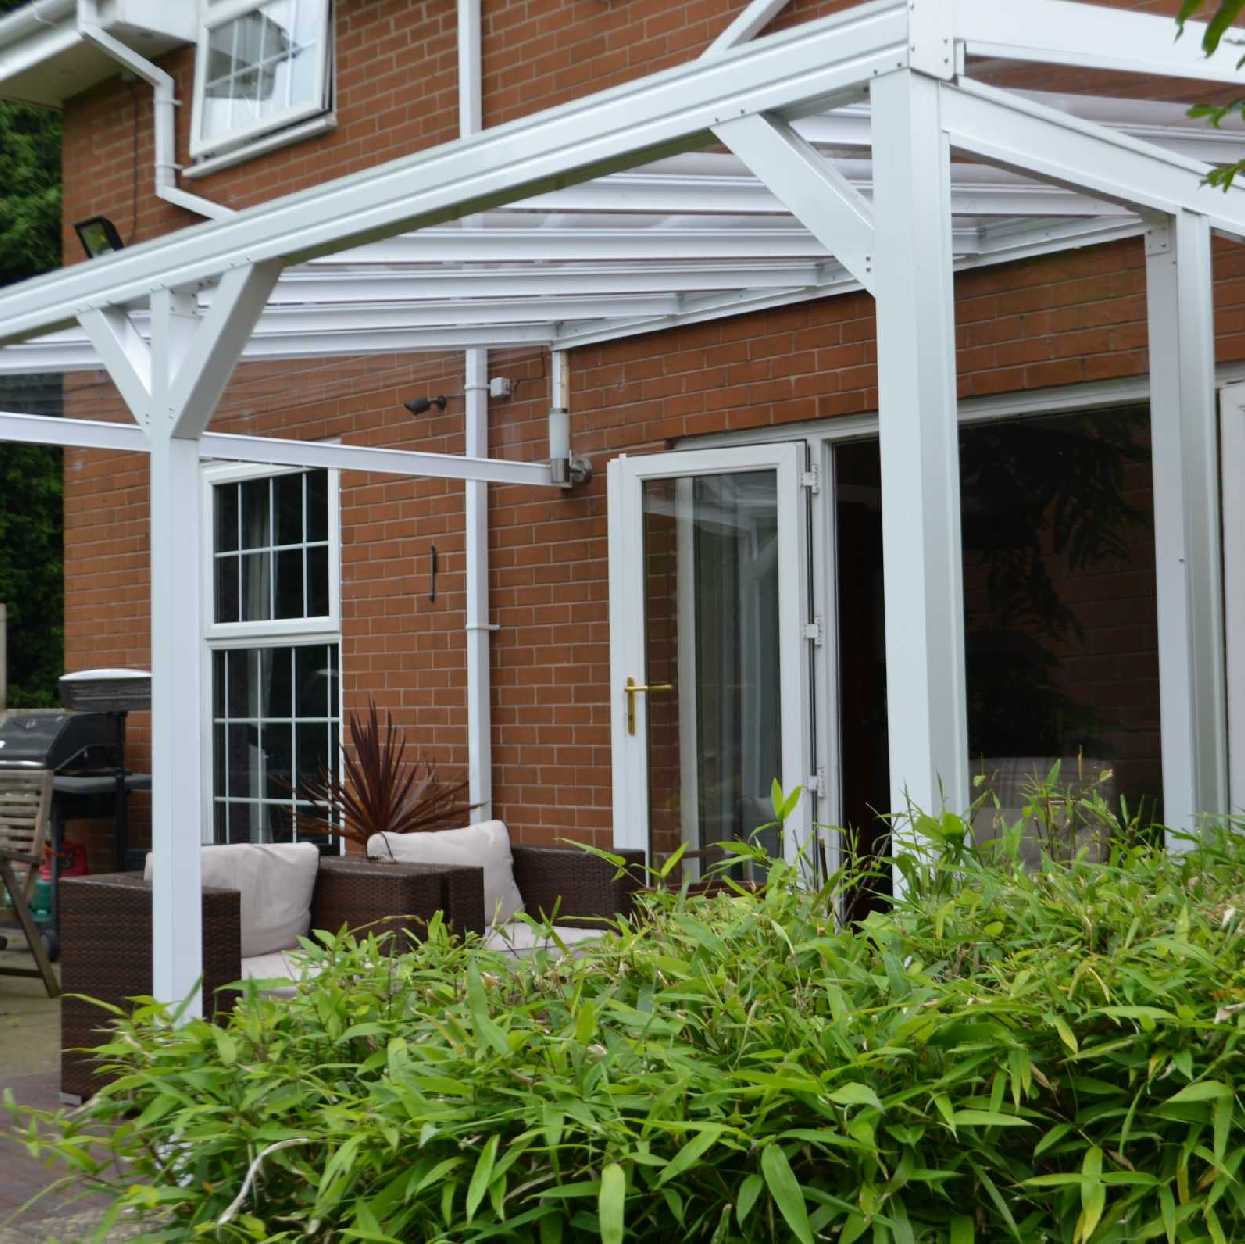 Omega Smart Lean-To Canopy, White UNGLAZED for 6mm Glazing - 9.1m (W) x 2.0m (P), (5) Supporting Posts from Omega Build